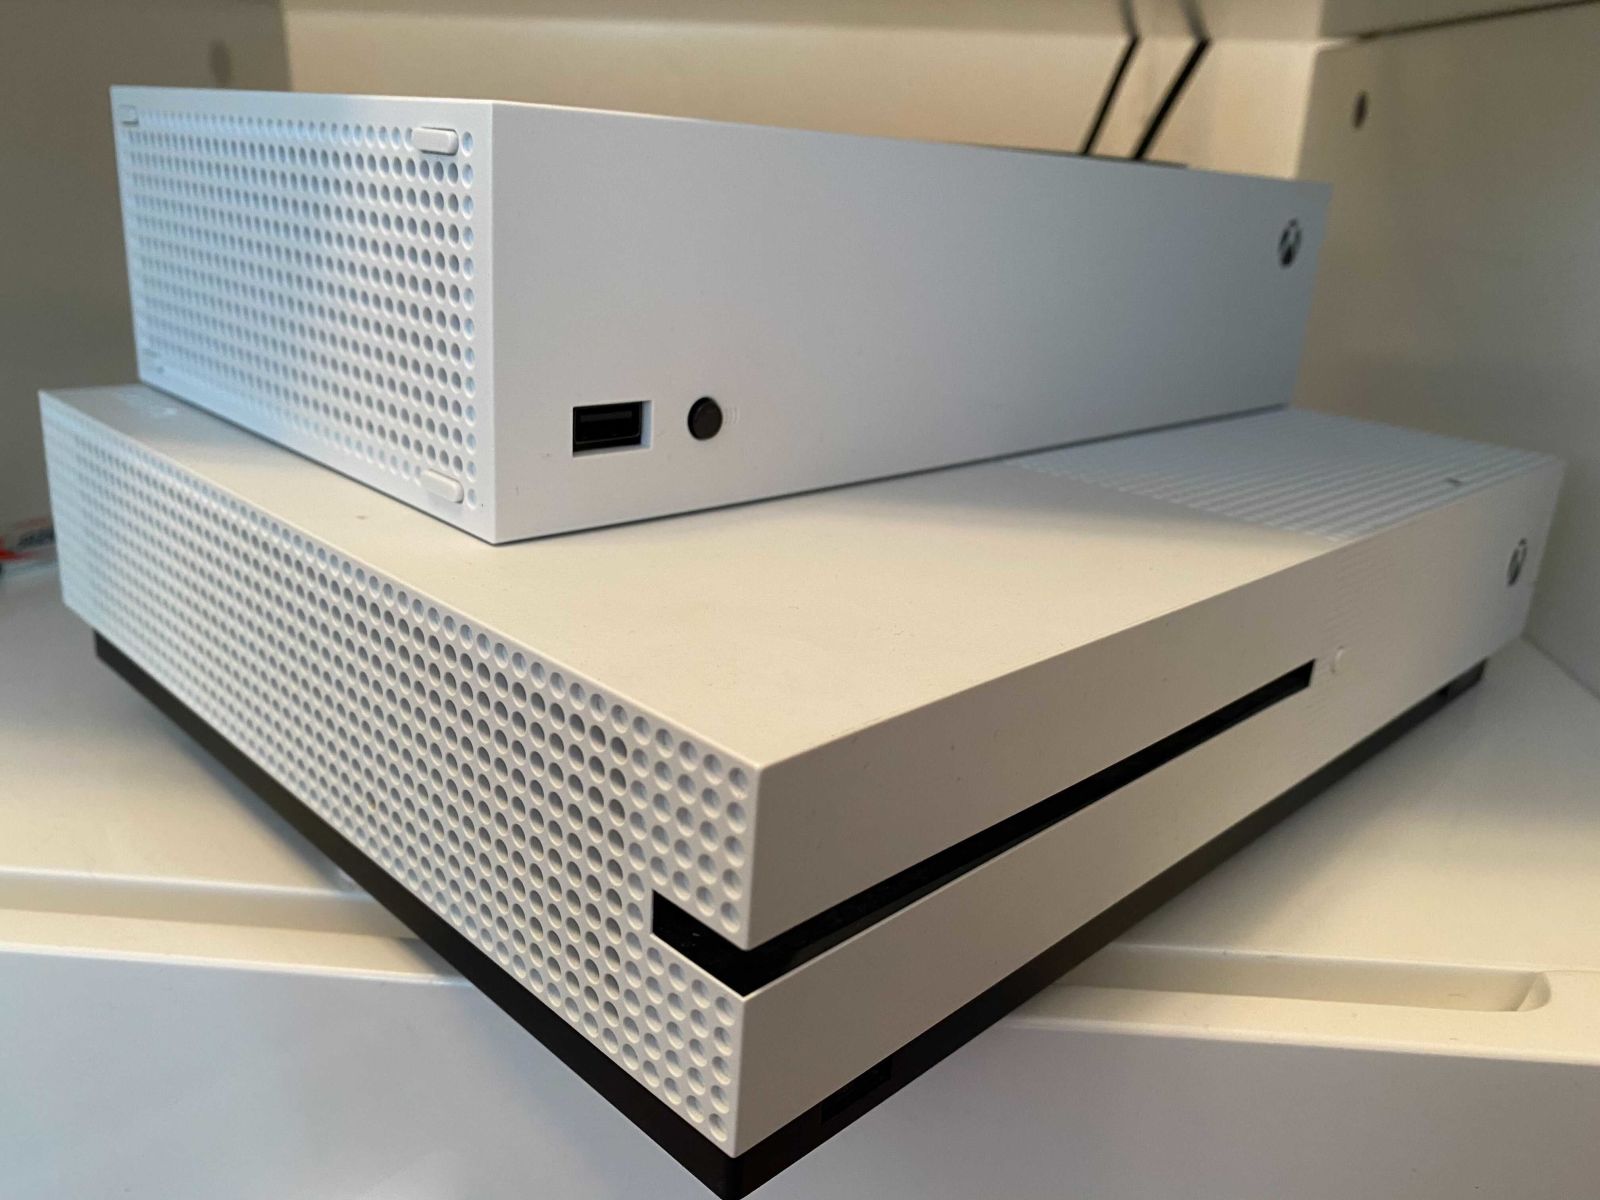 The Xbox Series X sitting atop the much larger Xbox One S.  (Photo: Kotaku)